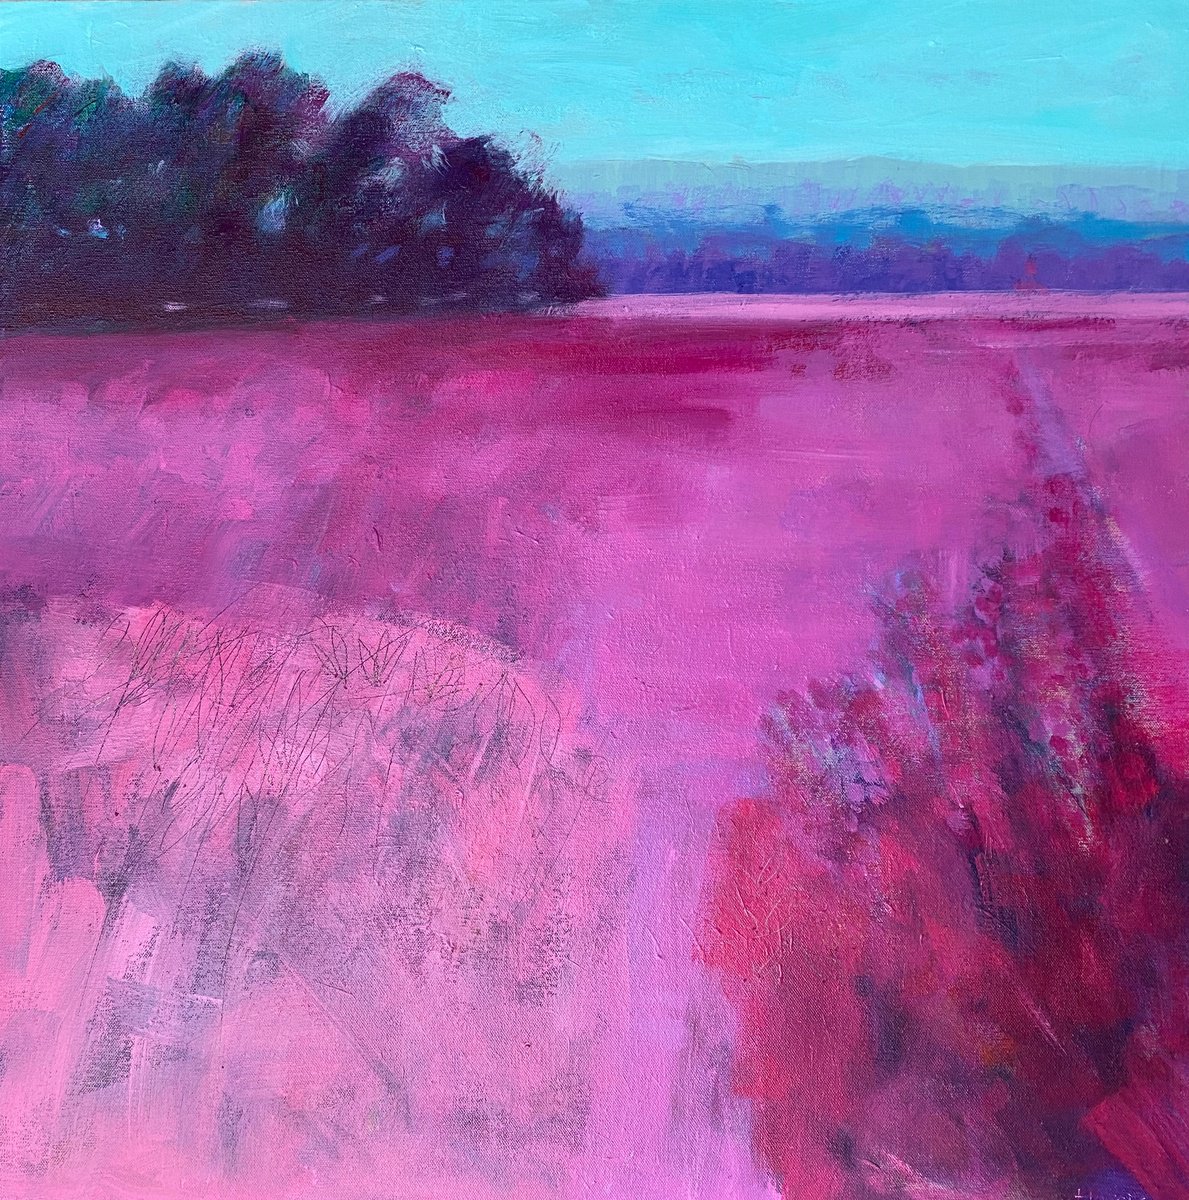 Dark Woods with Pink Field by Chrissie Havers